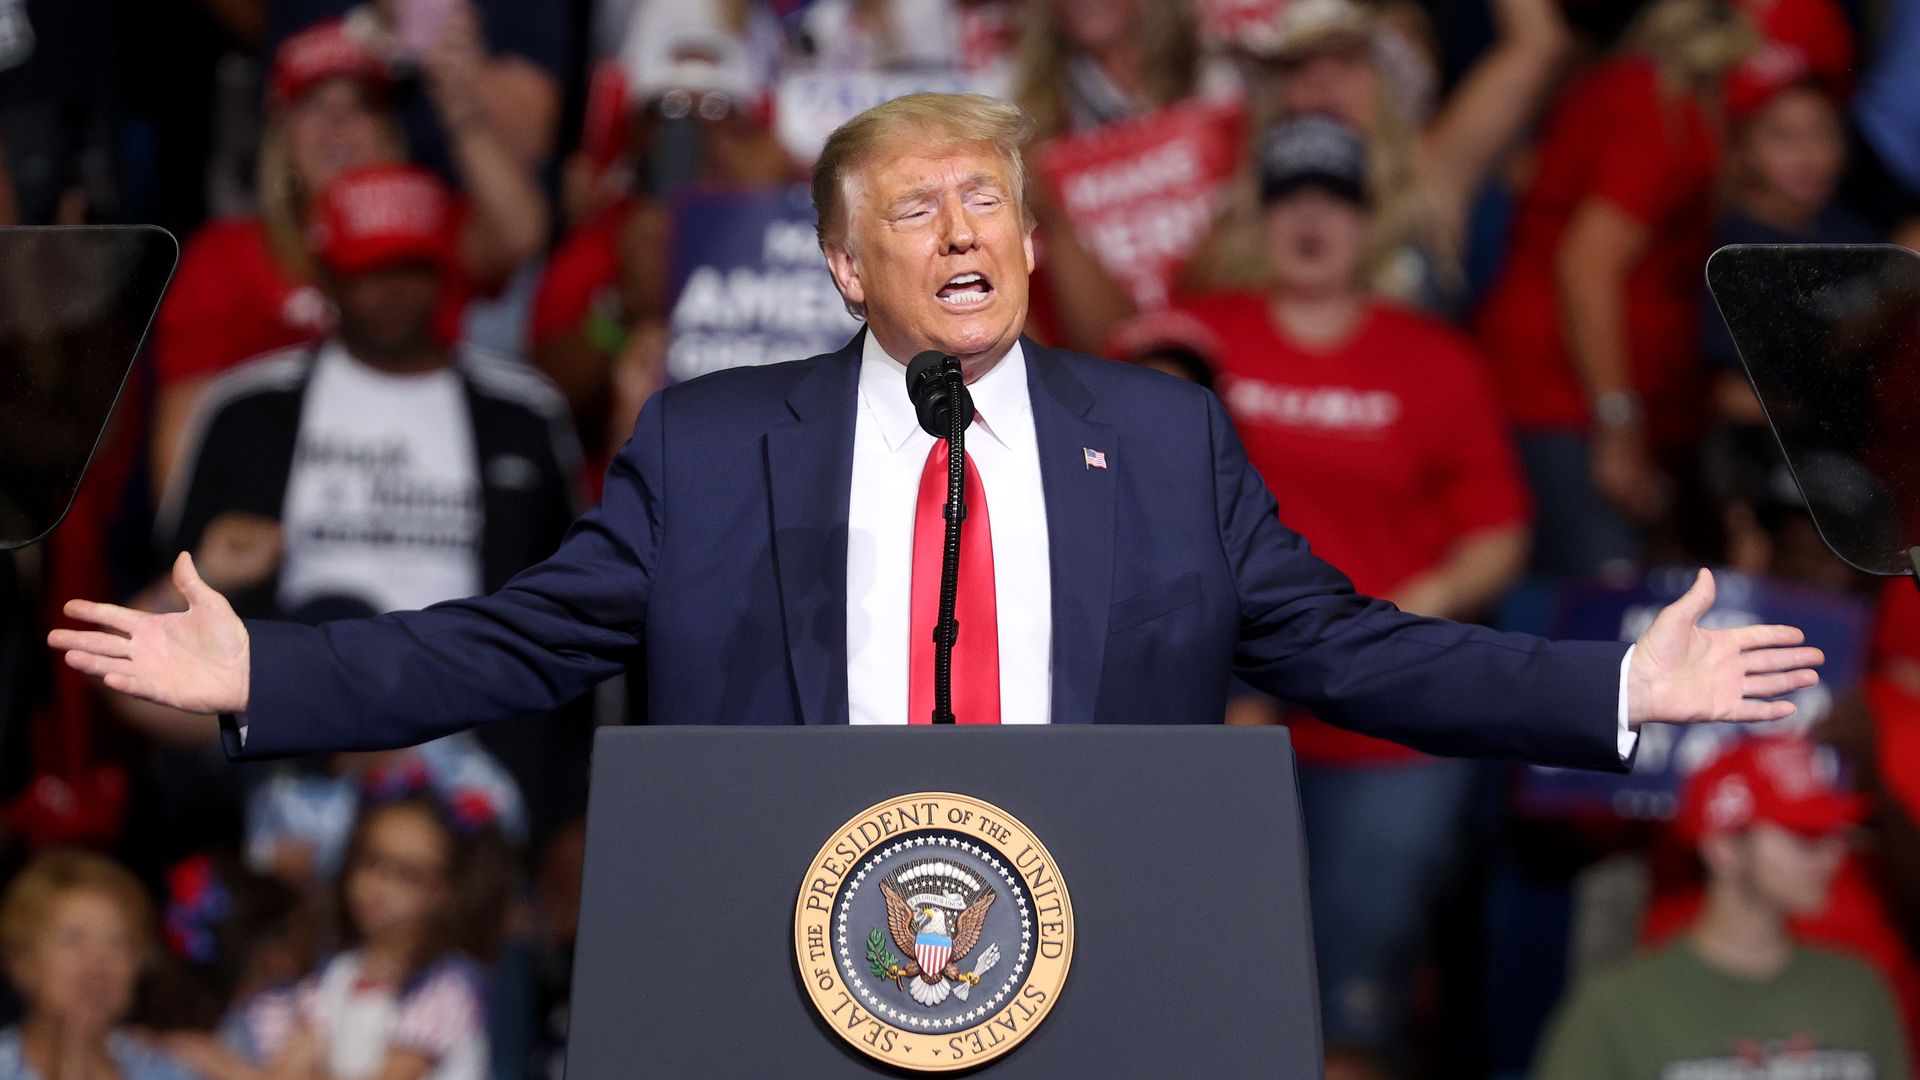 President Donald Trump arrives at a campaign rally at the BOK Center, June 20, 2020 in Tulsa, Oklahoma. 